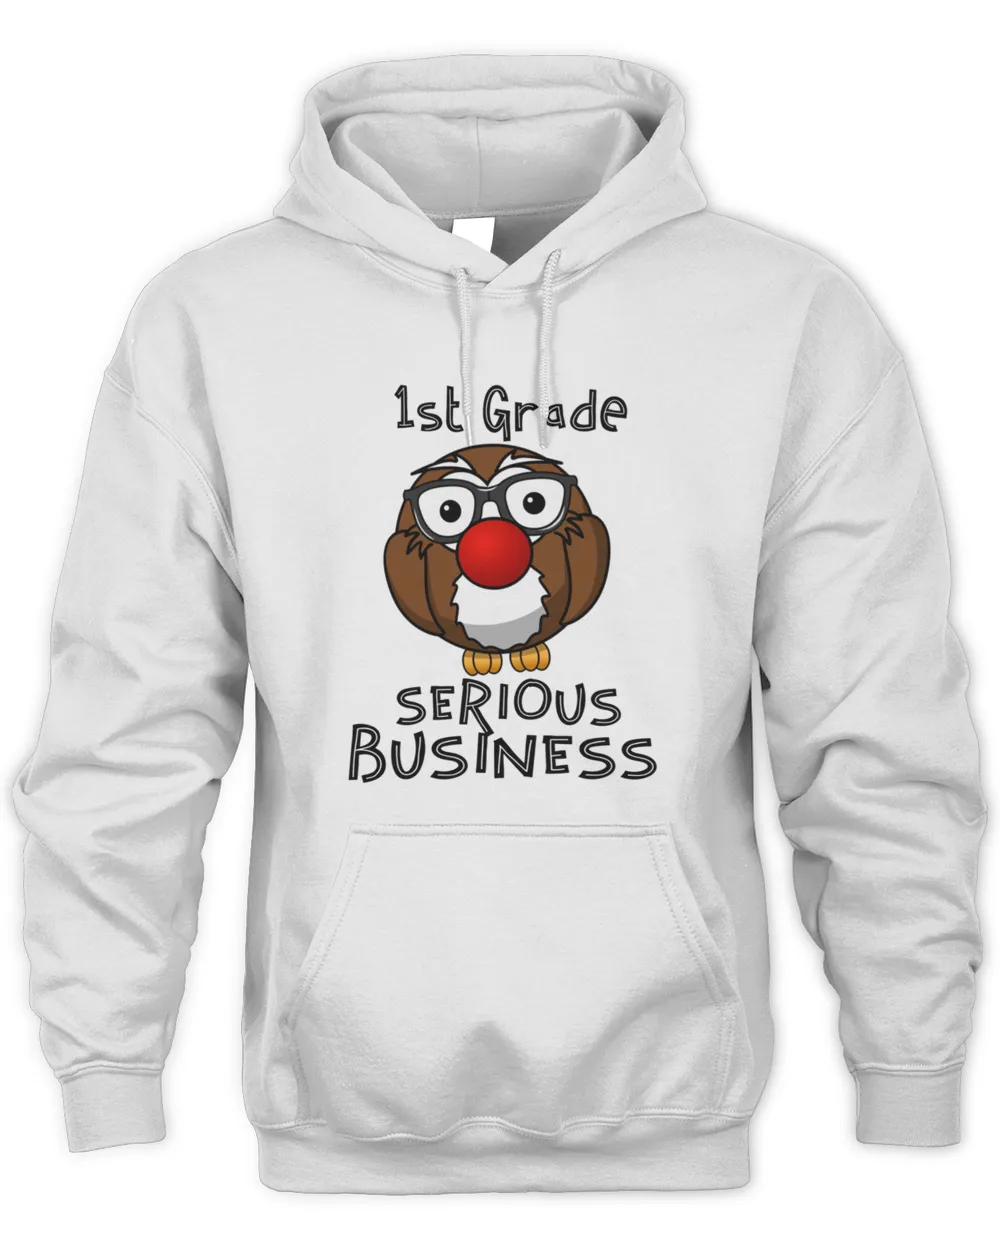 st Grade  SERIOUS BUSINESS  Funny Owl Graphic With RED Nose  School Jokes T-Shirt